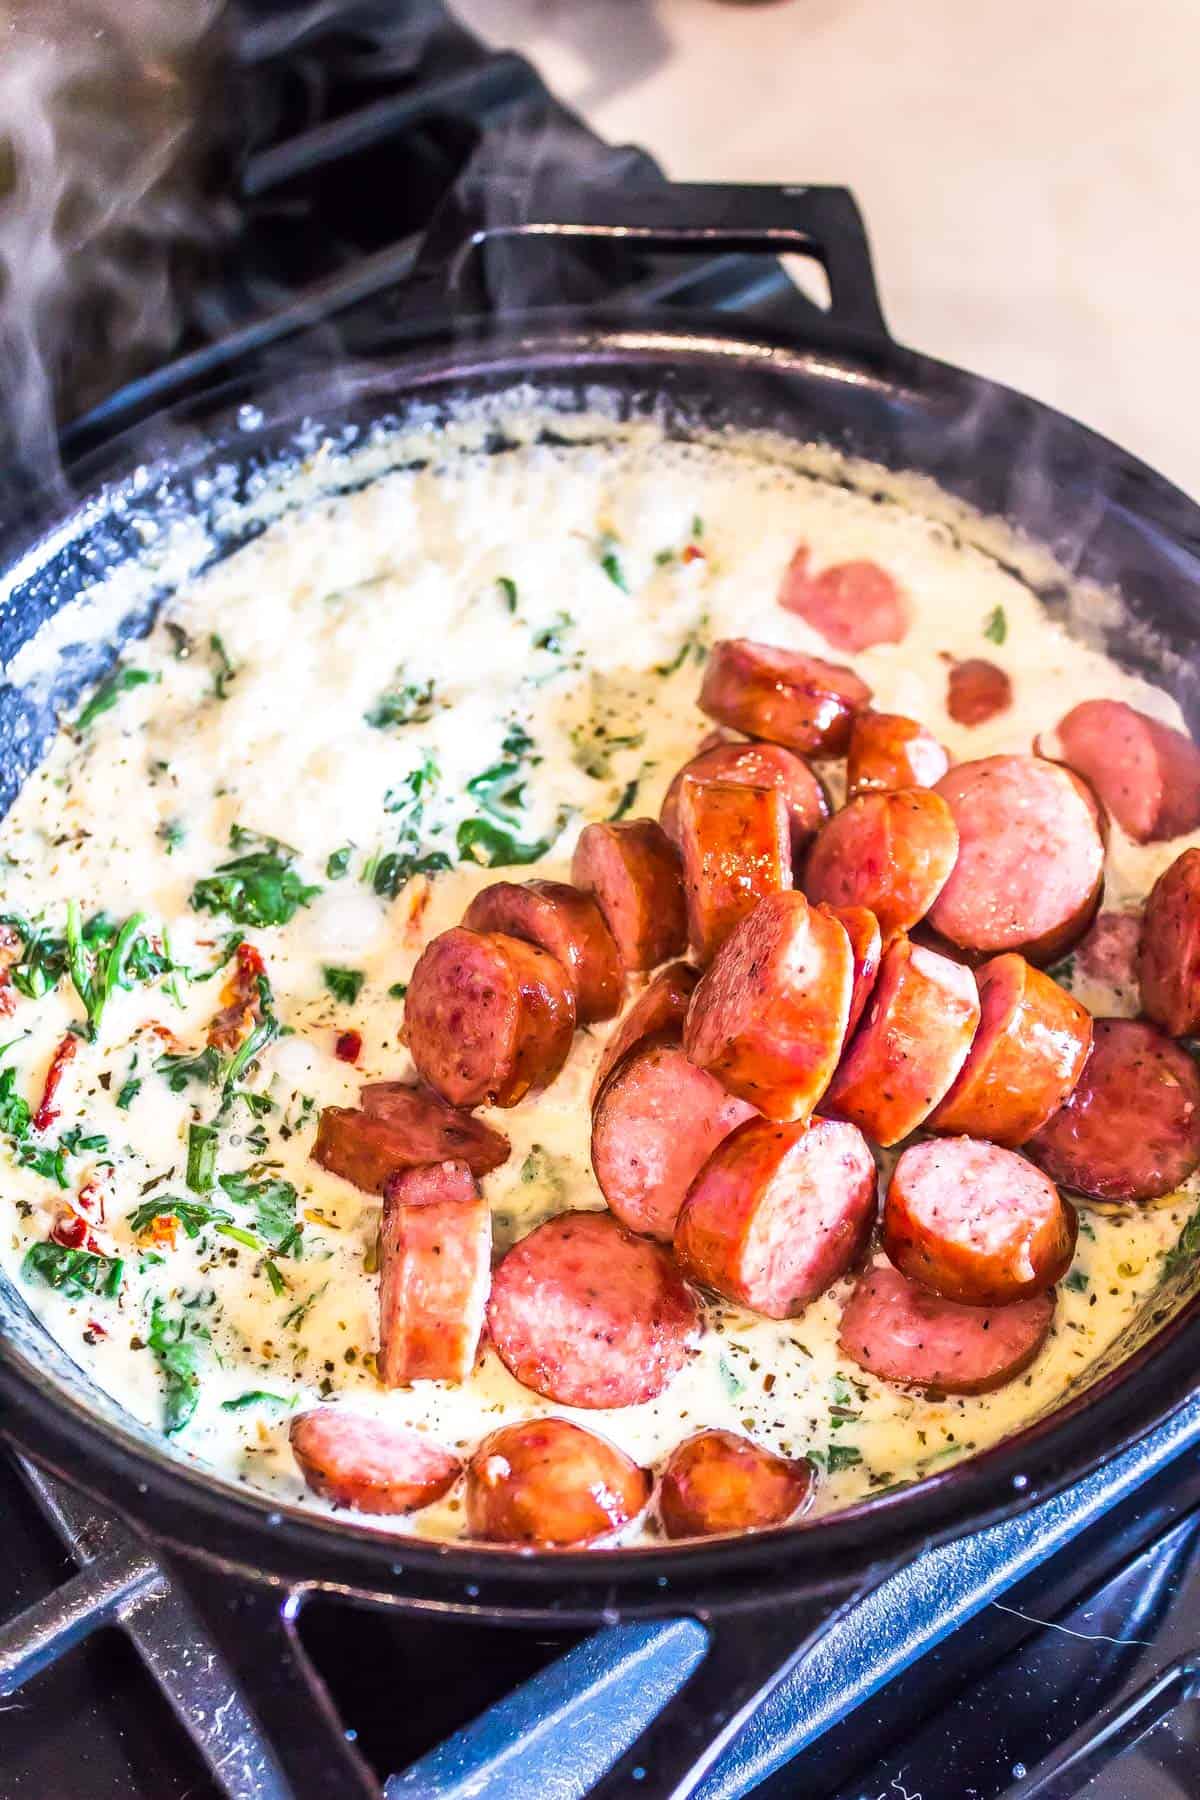 Sausage and cream sauce being mixed and beginning to be cooked